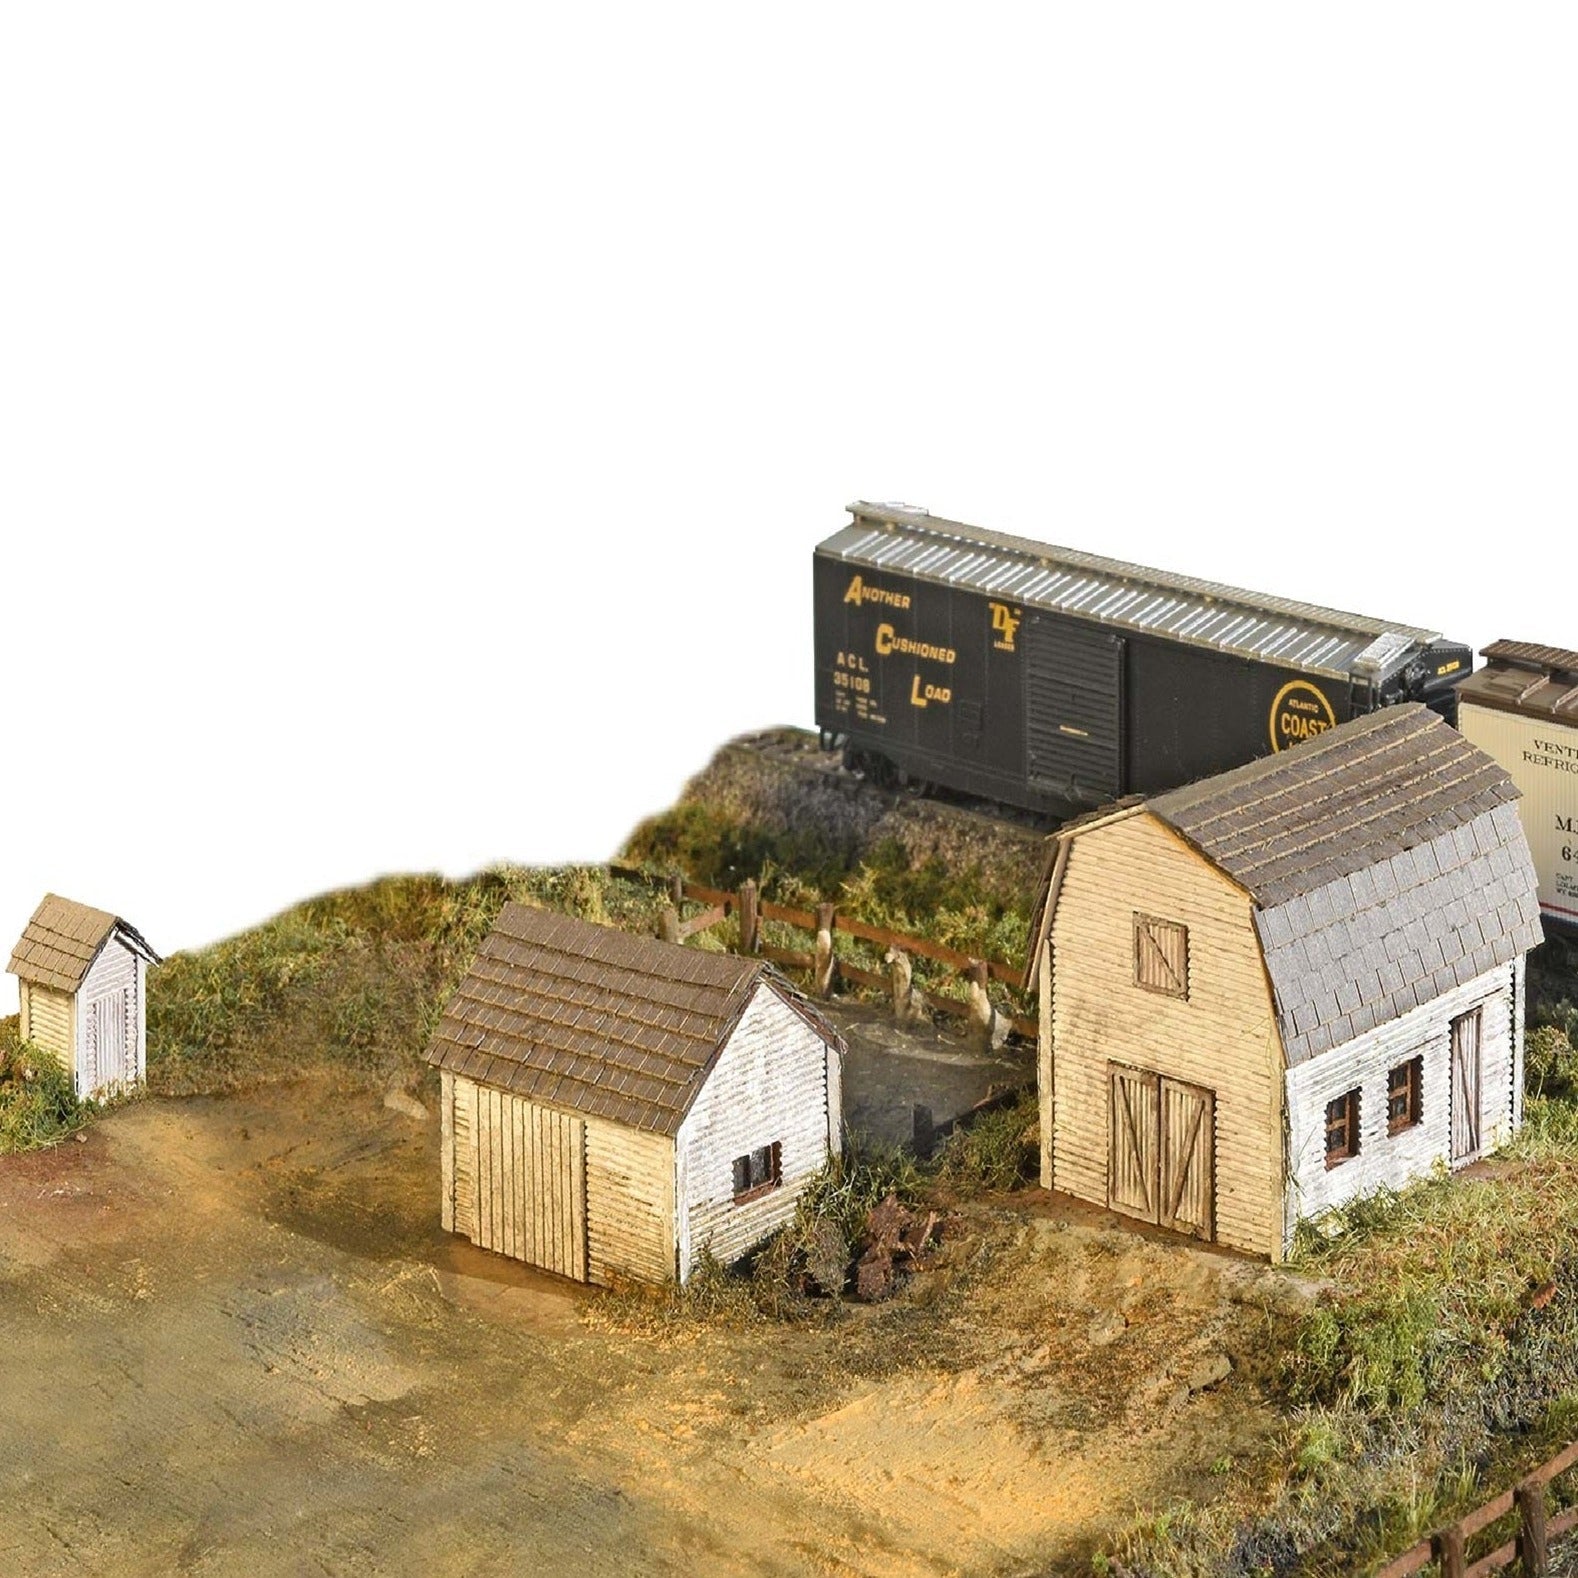 Rural Farm Structures, Set of 3 Kits, N Scale, By Scientific